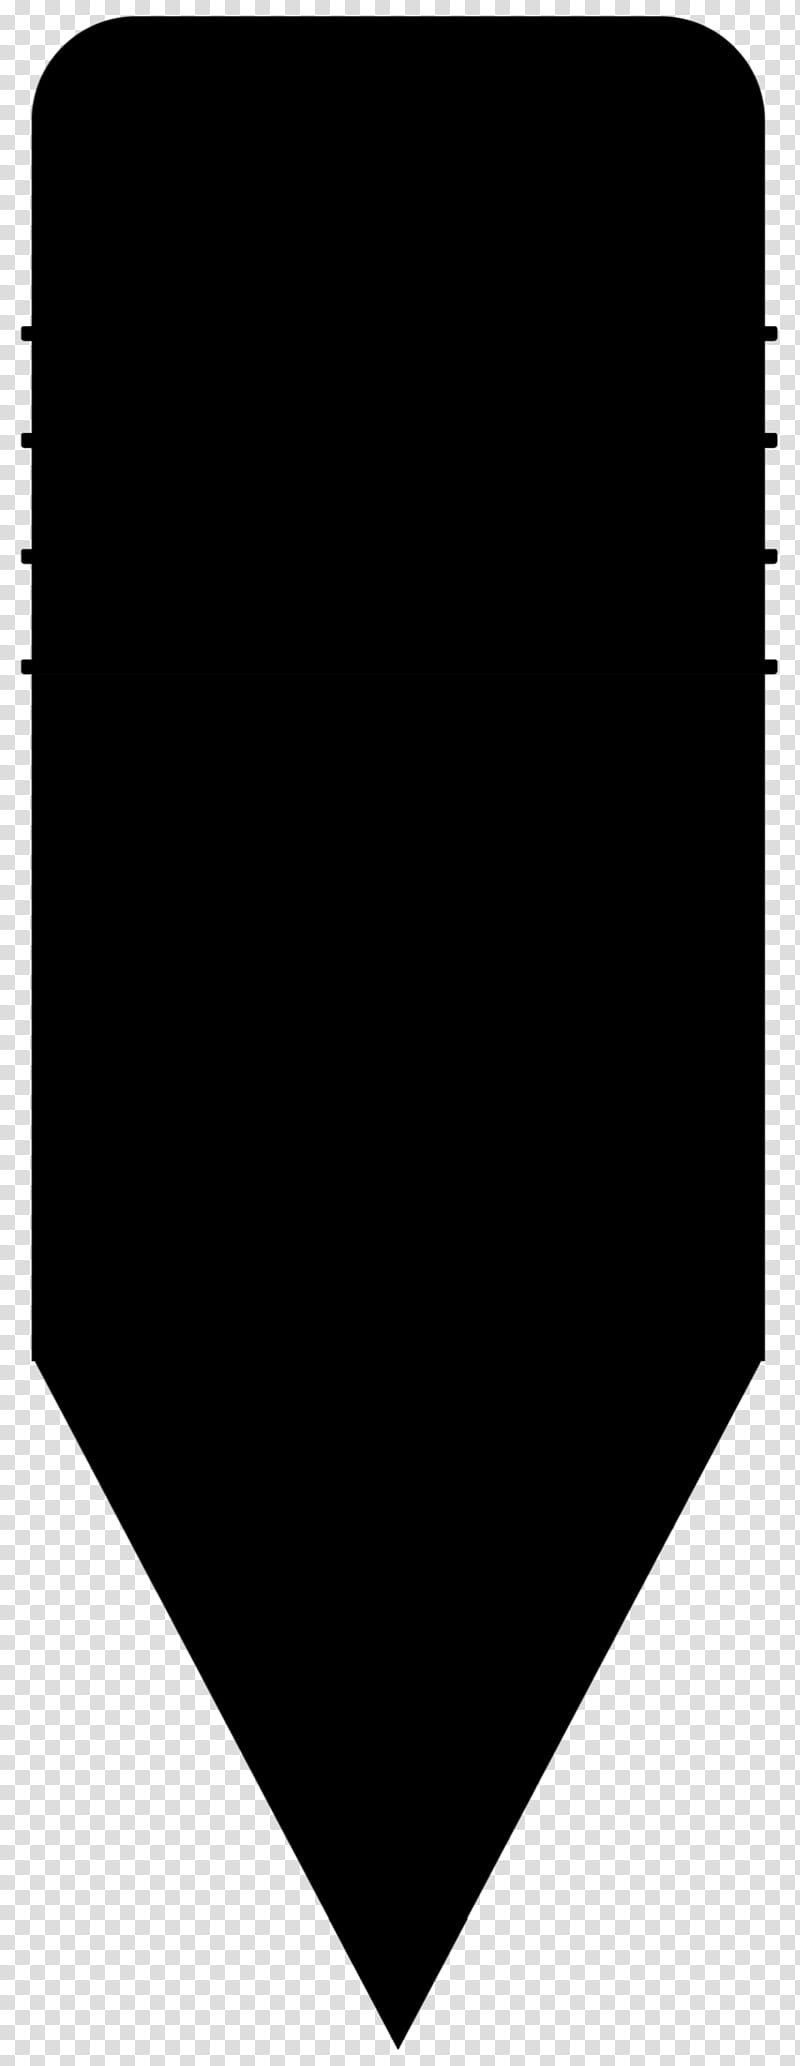 Festival, Computer Security, Industrial Control System, Producer, Text, Angle, Black M, Line transparent background PNG clipart